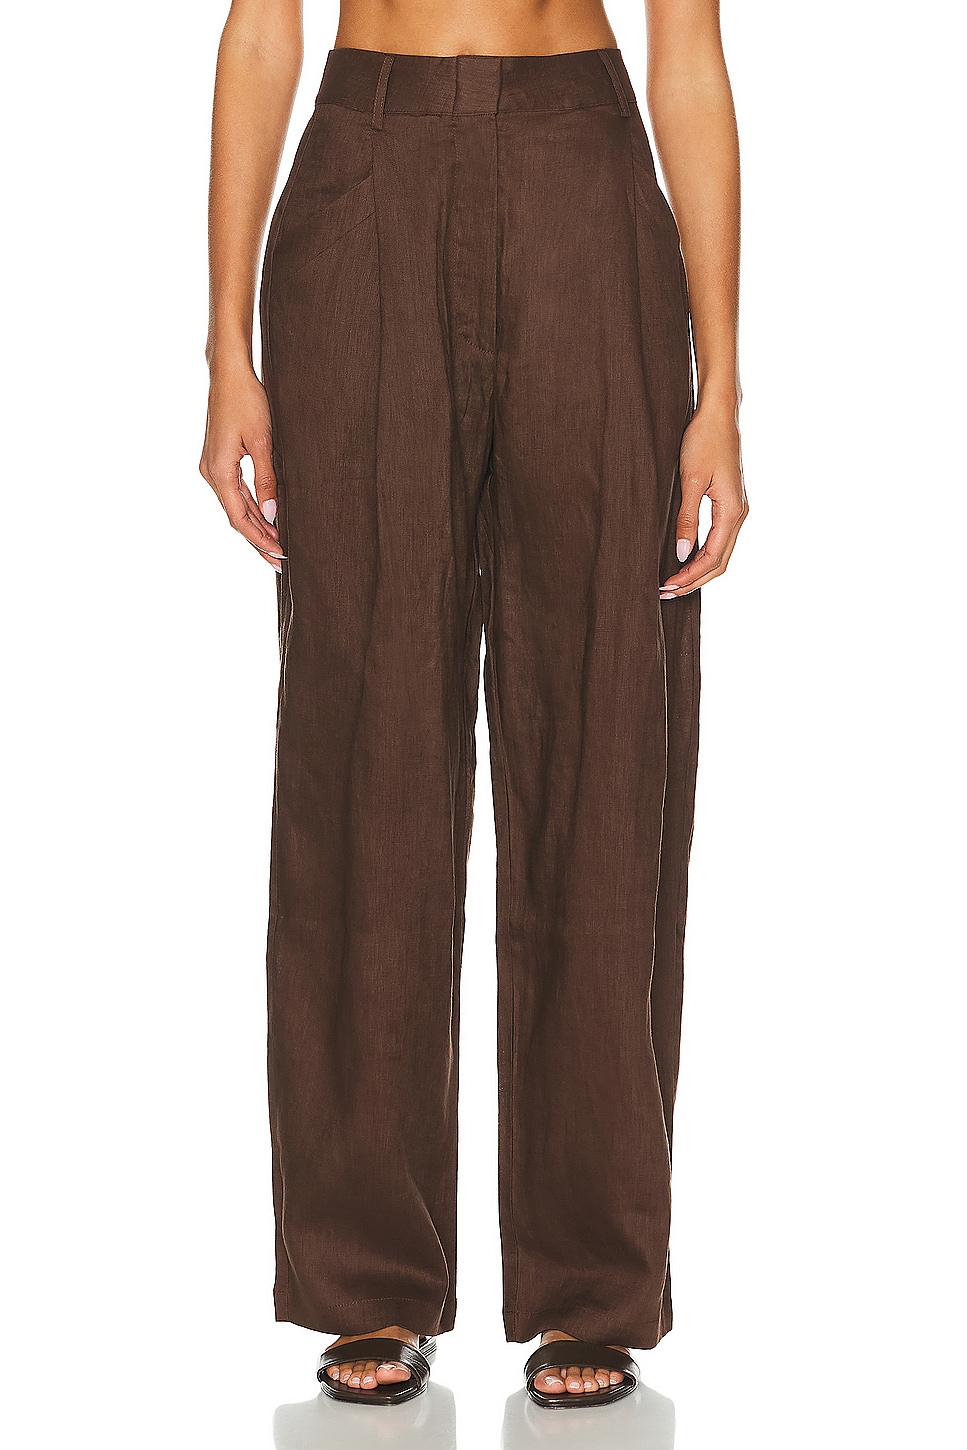 Image 1 of AEXAE Linen Trouser in Brown